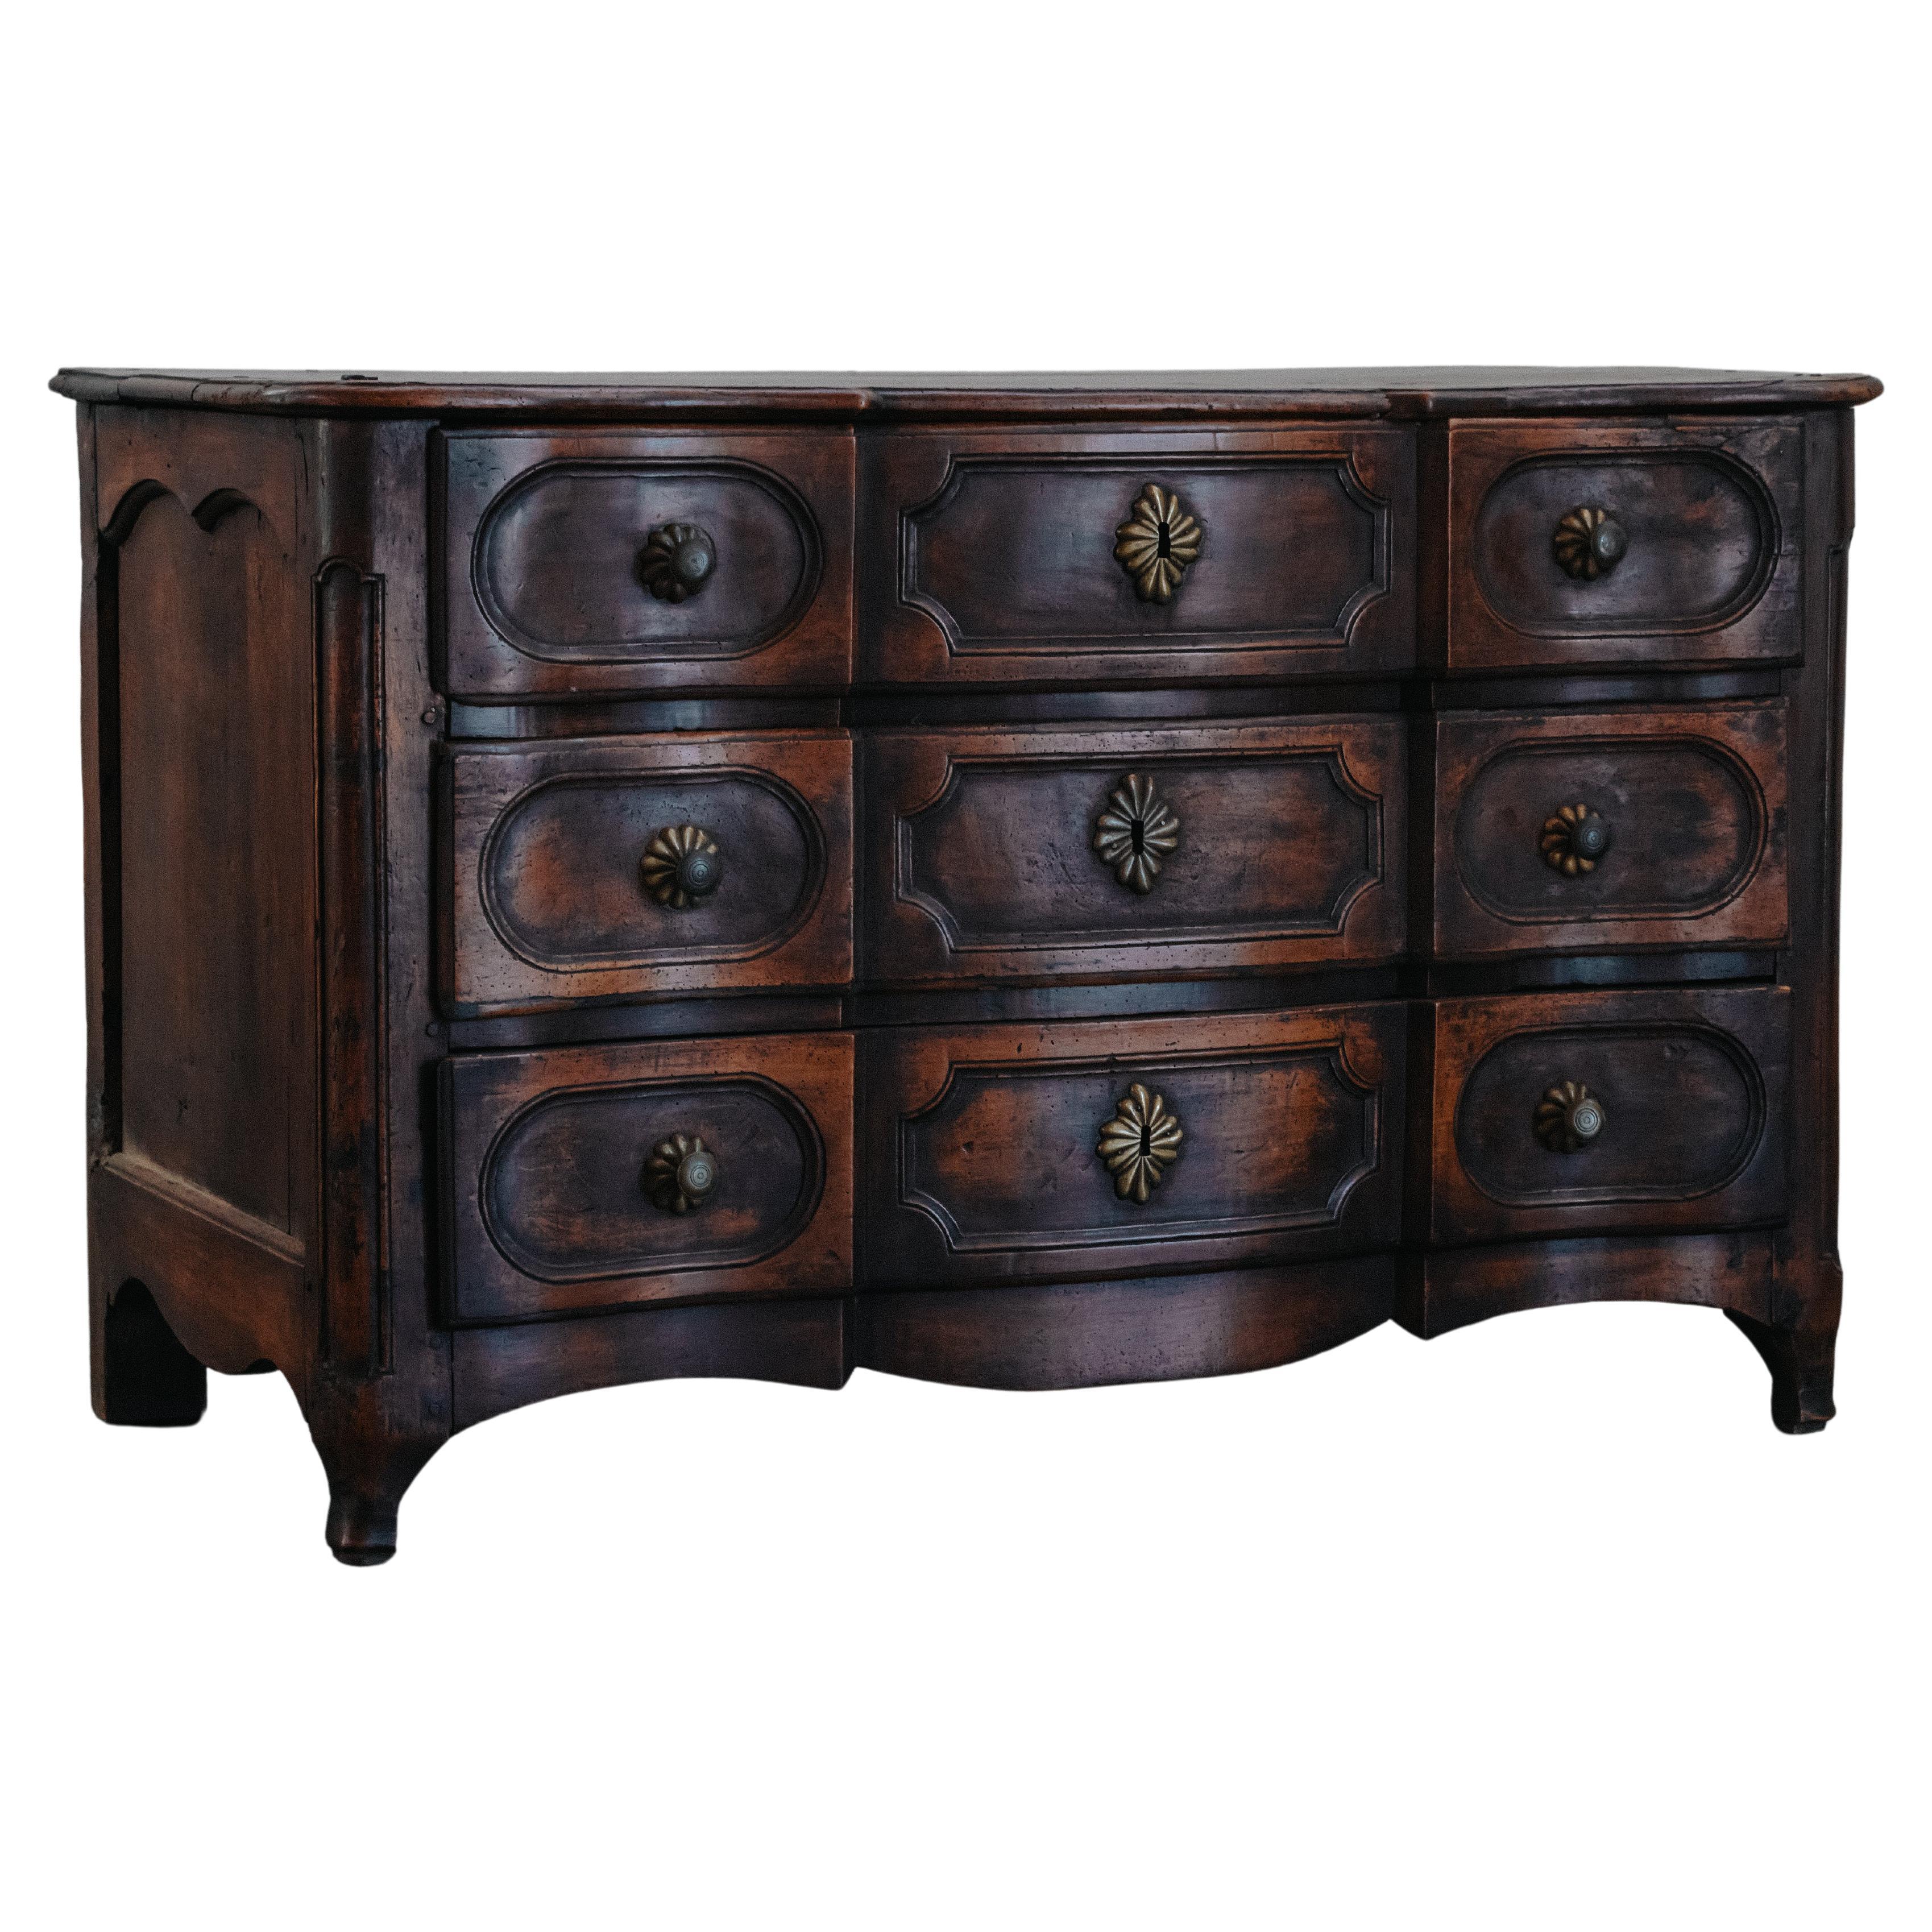 Early Walnut Chest of Drawers From France, Circa 1800